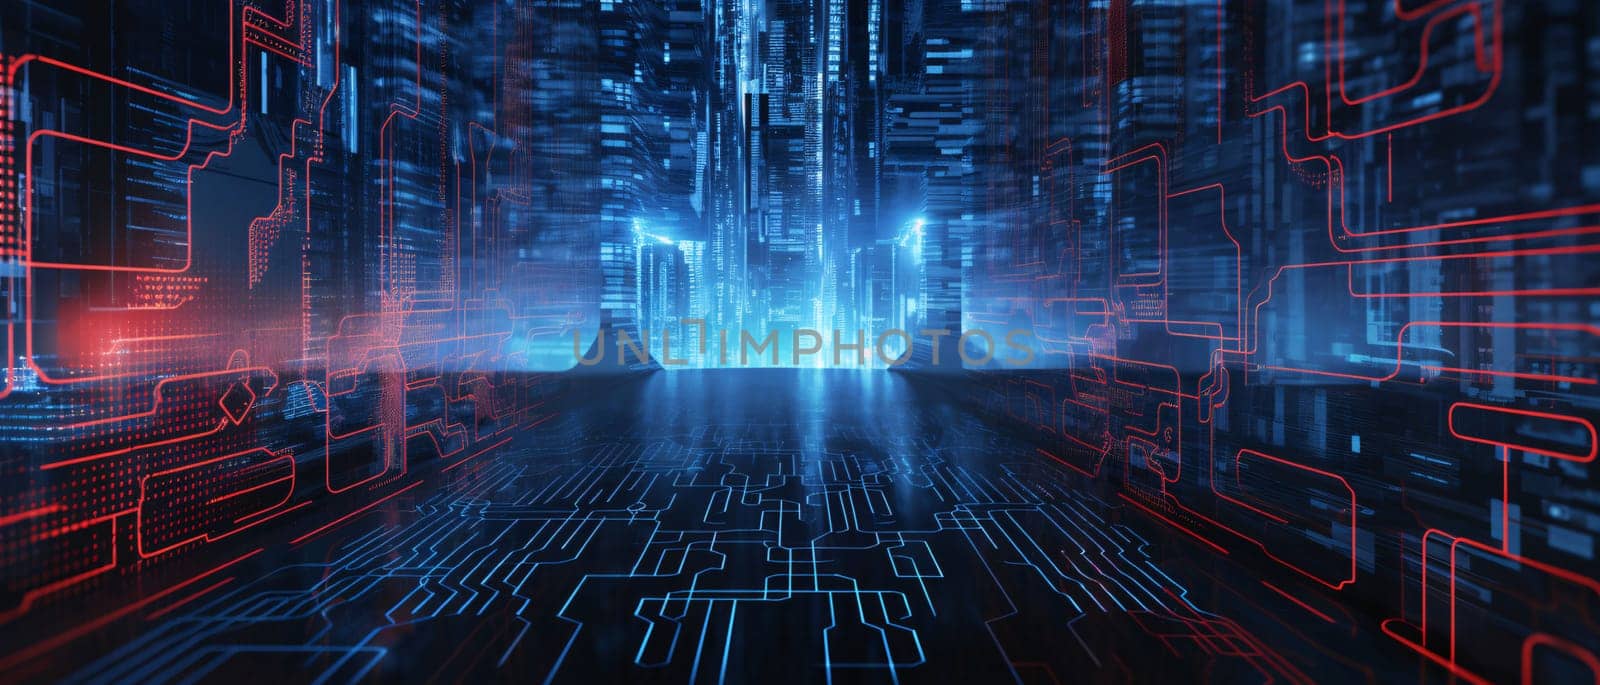 Digital cyberspace background with futuristic user interface. 3D rendering by ThemesS